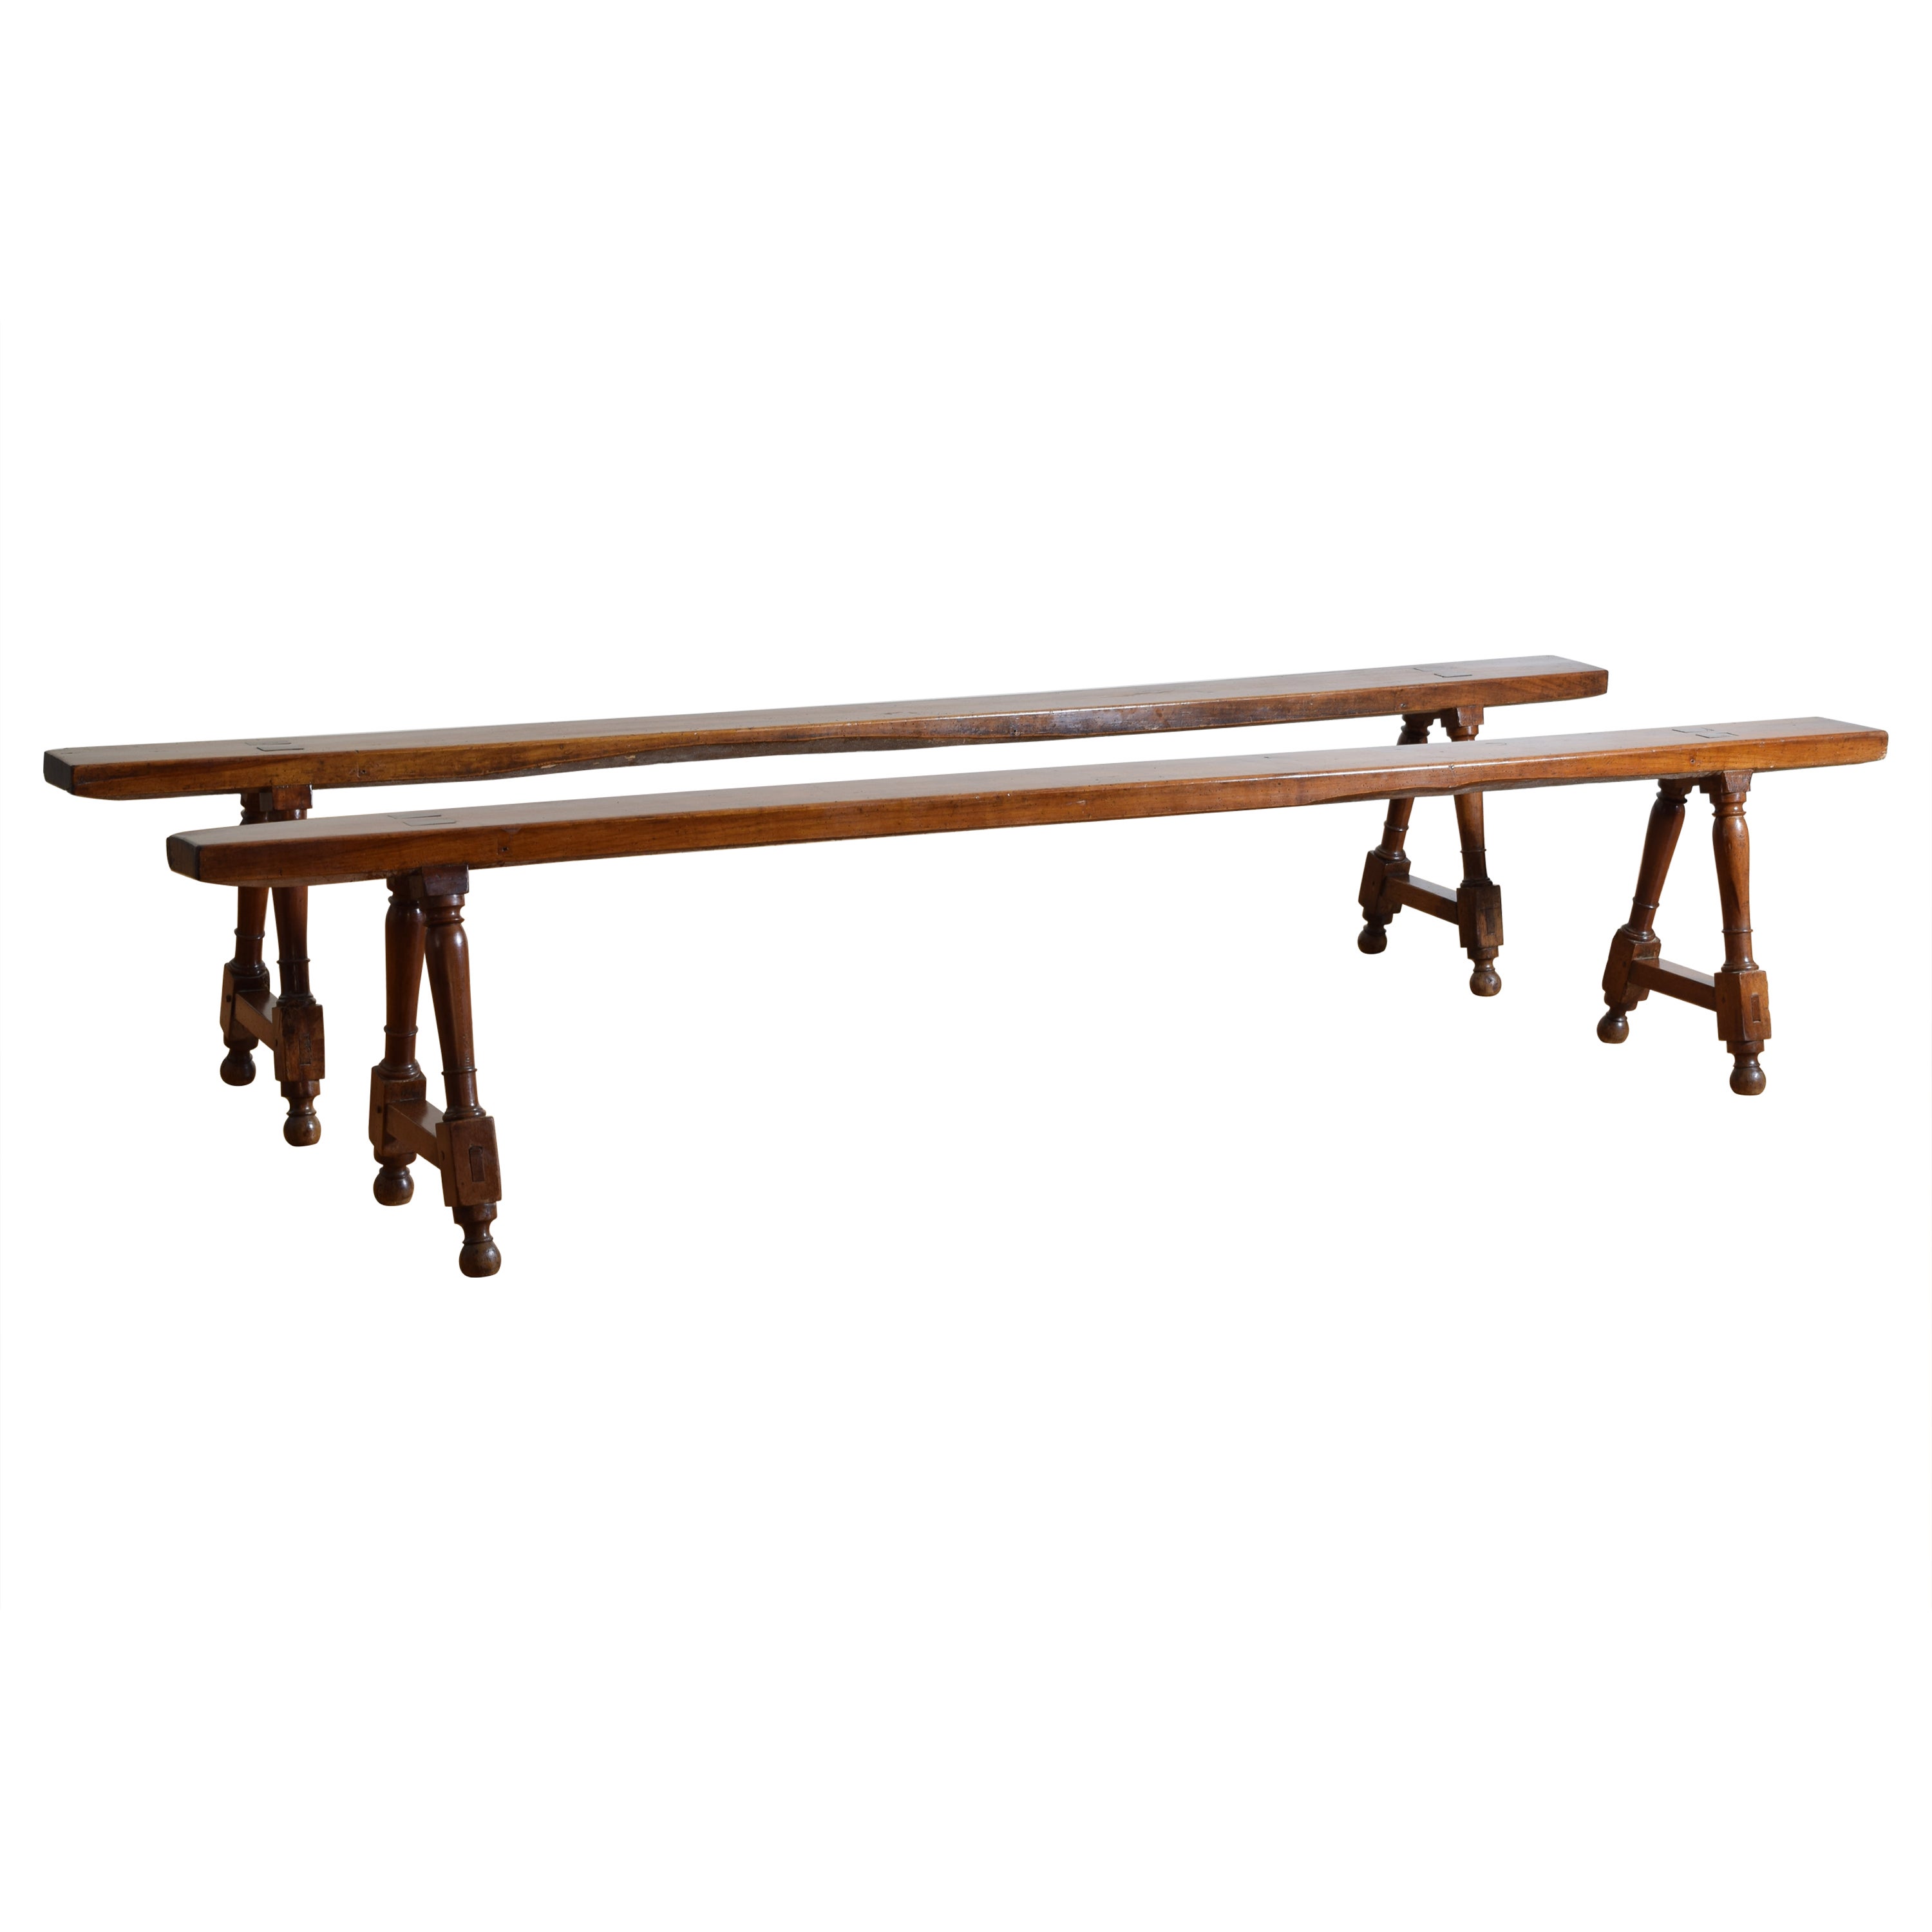 Pair Italian Louis XIII Style Fruitwood Trestle-Form Benches, mid 19th century For Sale